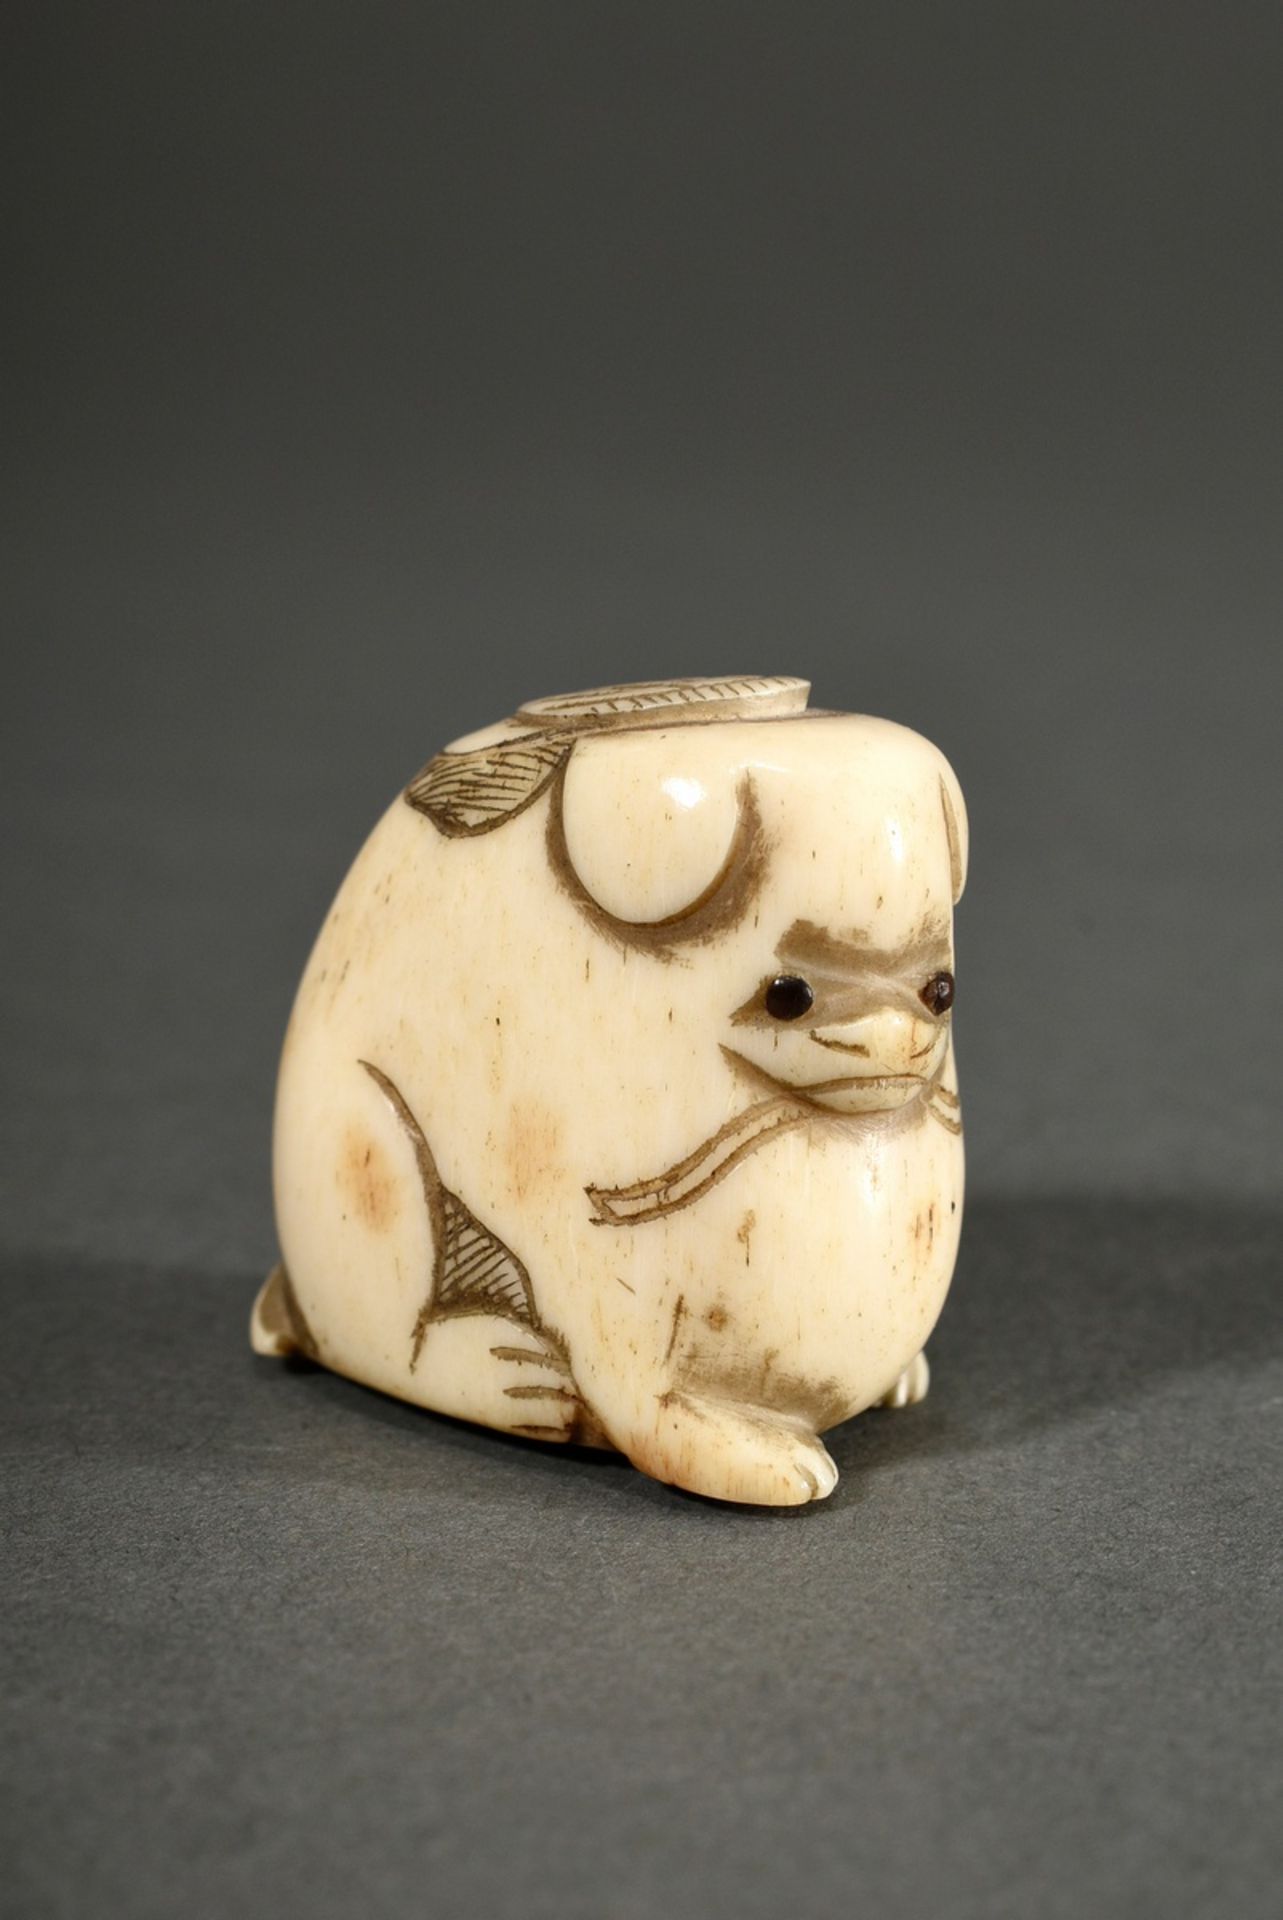 Stag horn netsuke "Sitting puppy" with inlaid horn eyes, Japan, h. 3.1cm